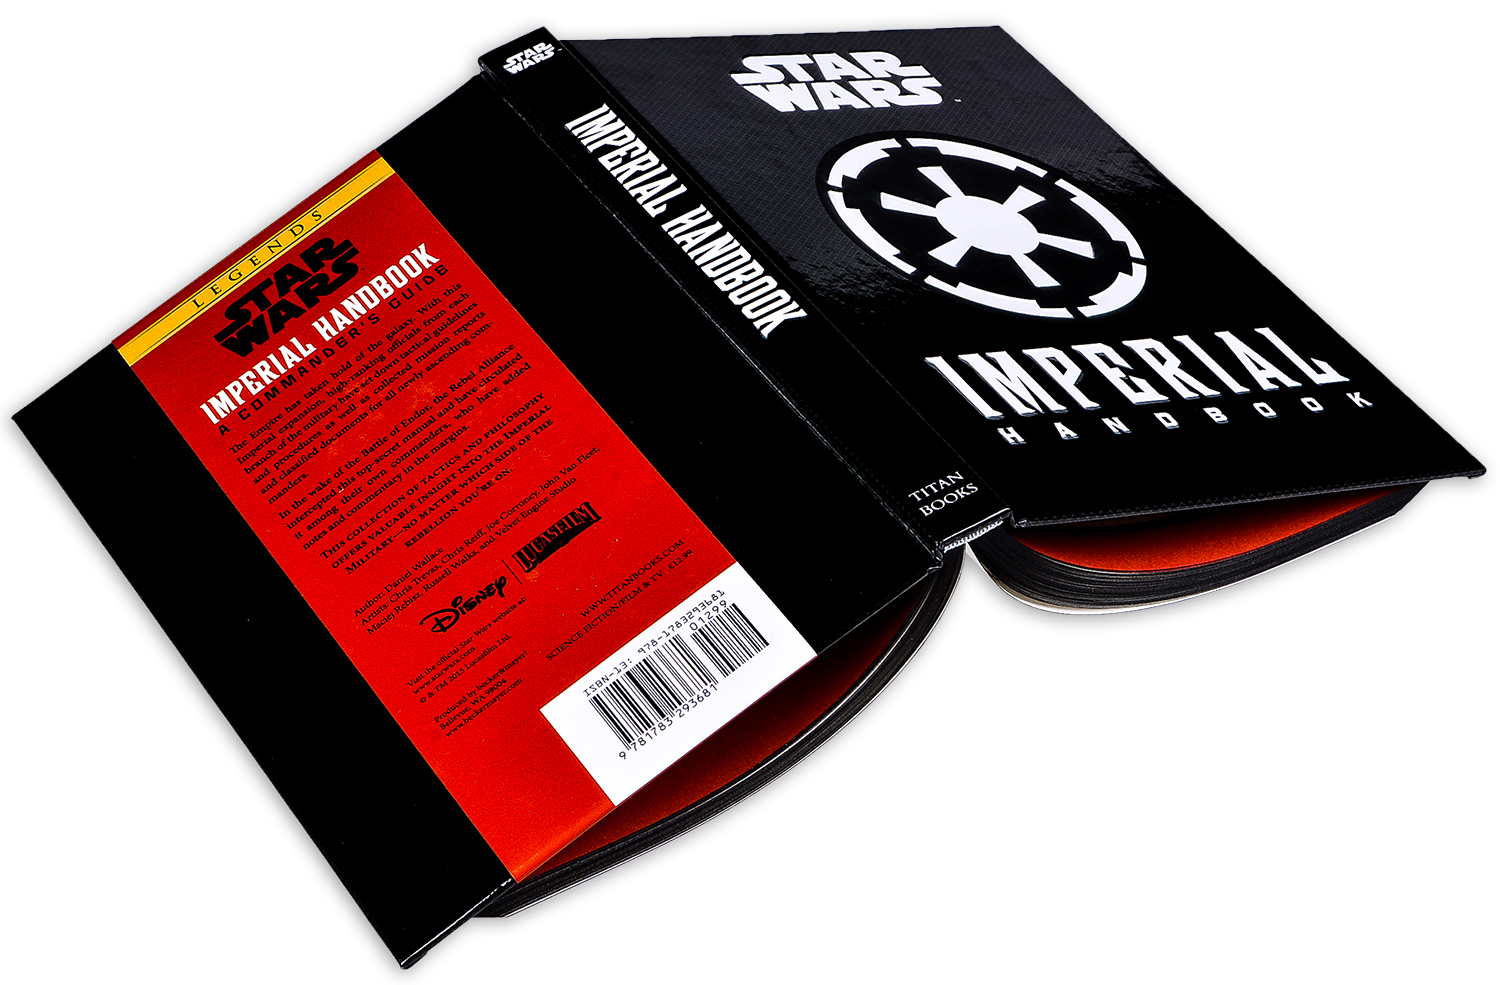 Star Wars. The Imperial Handbook: A Commander’s Guide